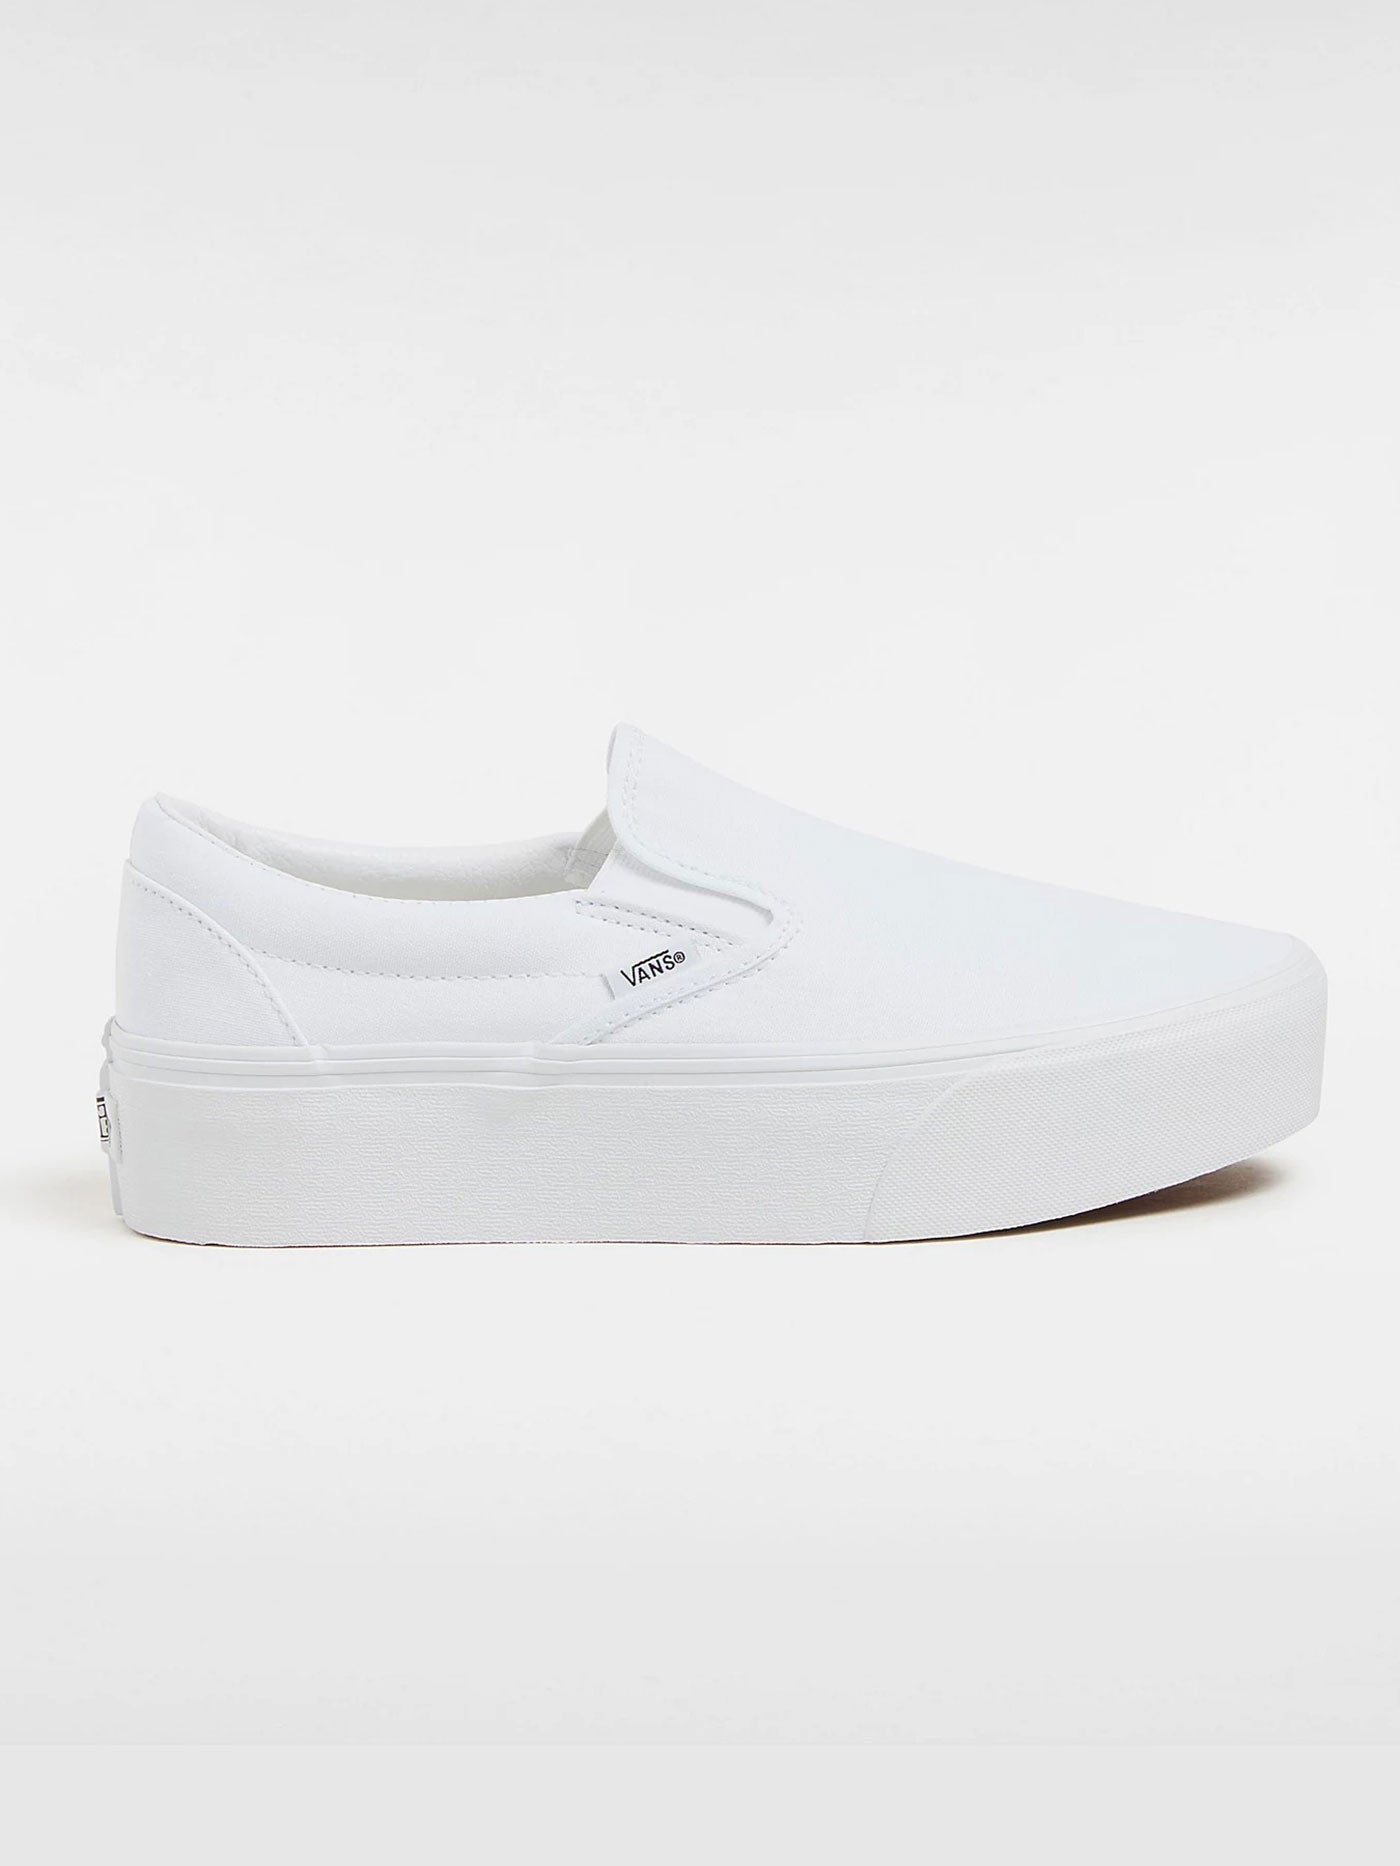 Vans Classic Slip-on Stackform Canvas White Shoes Spring 2024